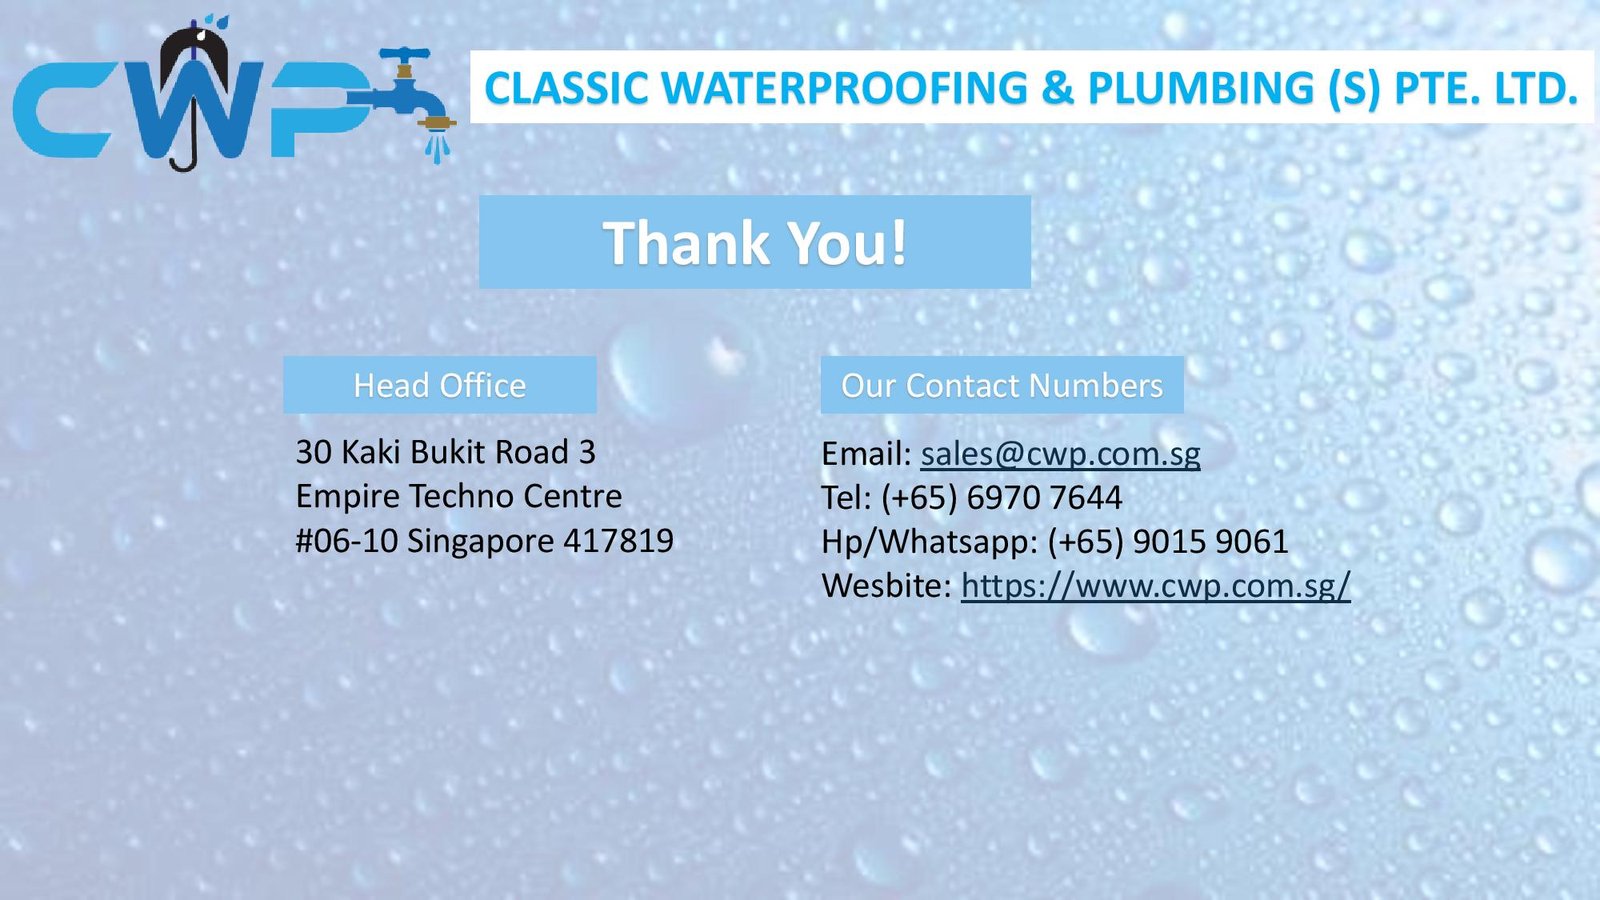 Classic waterproofing and plumbing pte ltd company profile